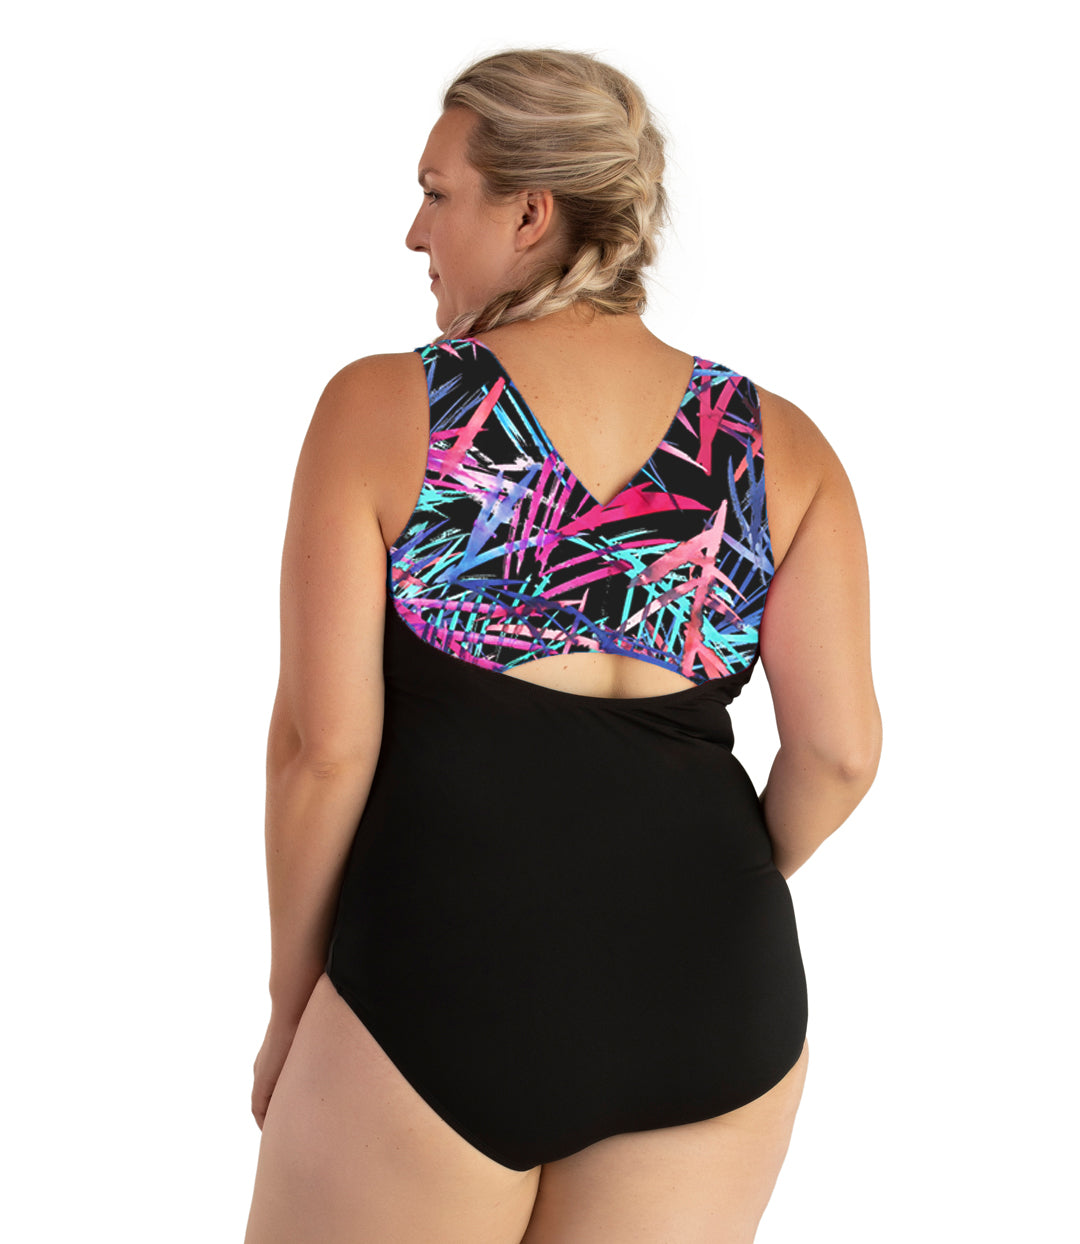 Plus size woman, back view, wearing JunoActive plus size AquaSport Crossback Tanksuit Sunset Palm Print Black. The crossback shoulder detail of the tanksuit has multi colored pink blue and black Palm print. The main body of the suit is solid black, keyhole opening at the mid-back.